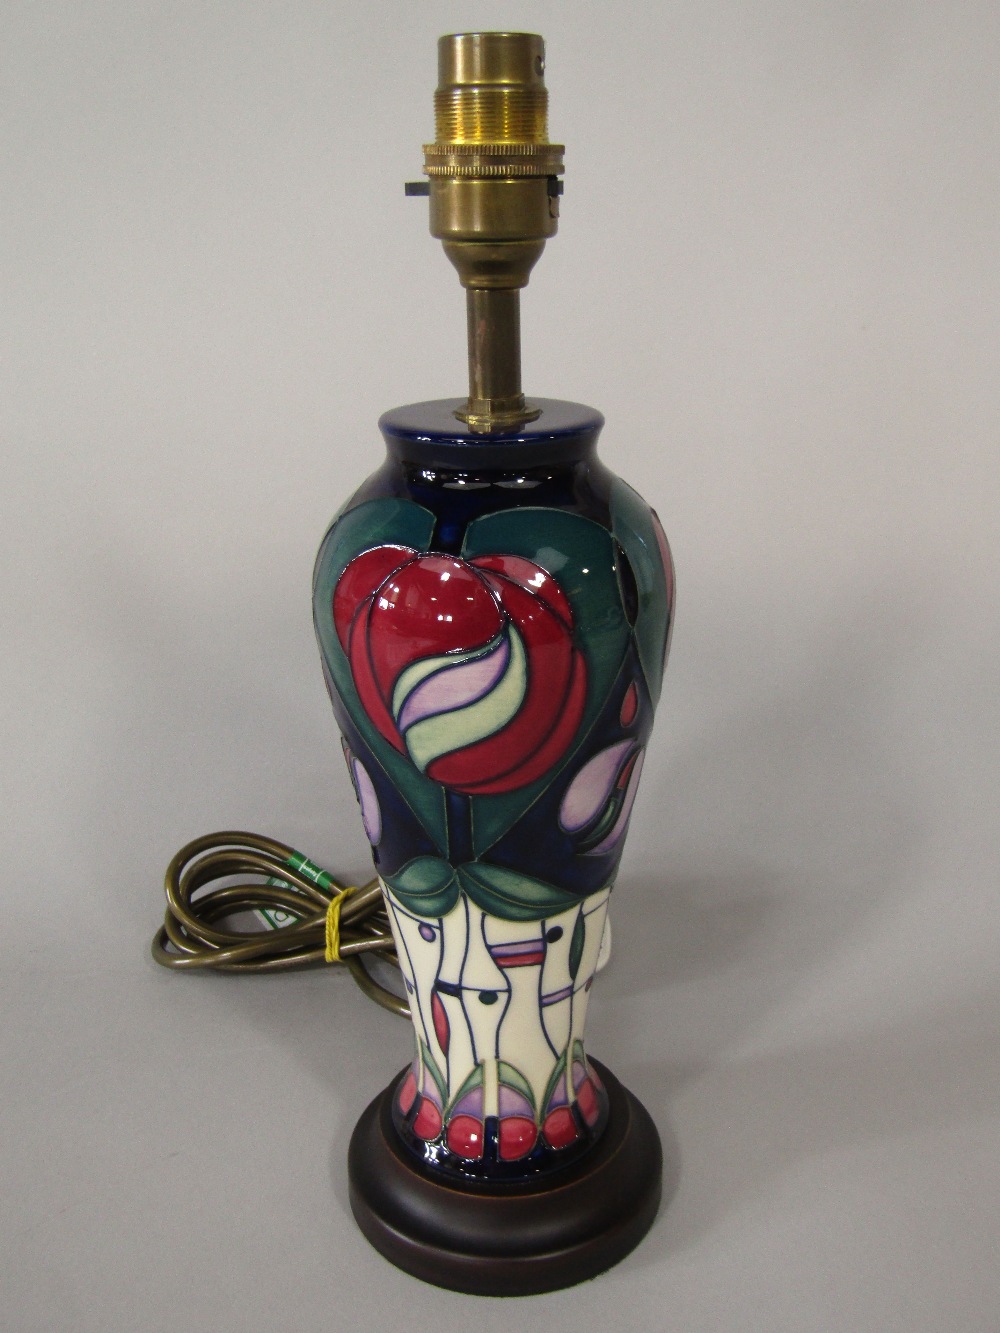 A Moorcroft lamp base of shouldered form in the Tribute to Charles Rennie Mackintosh pattern, 20.5